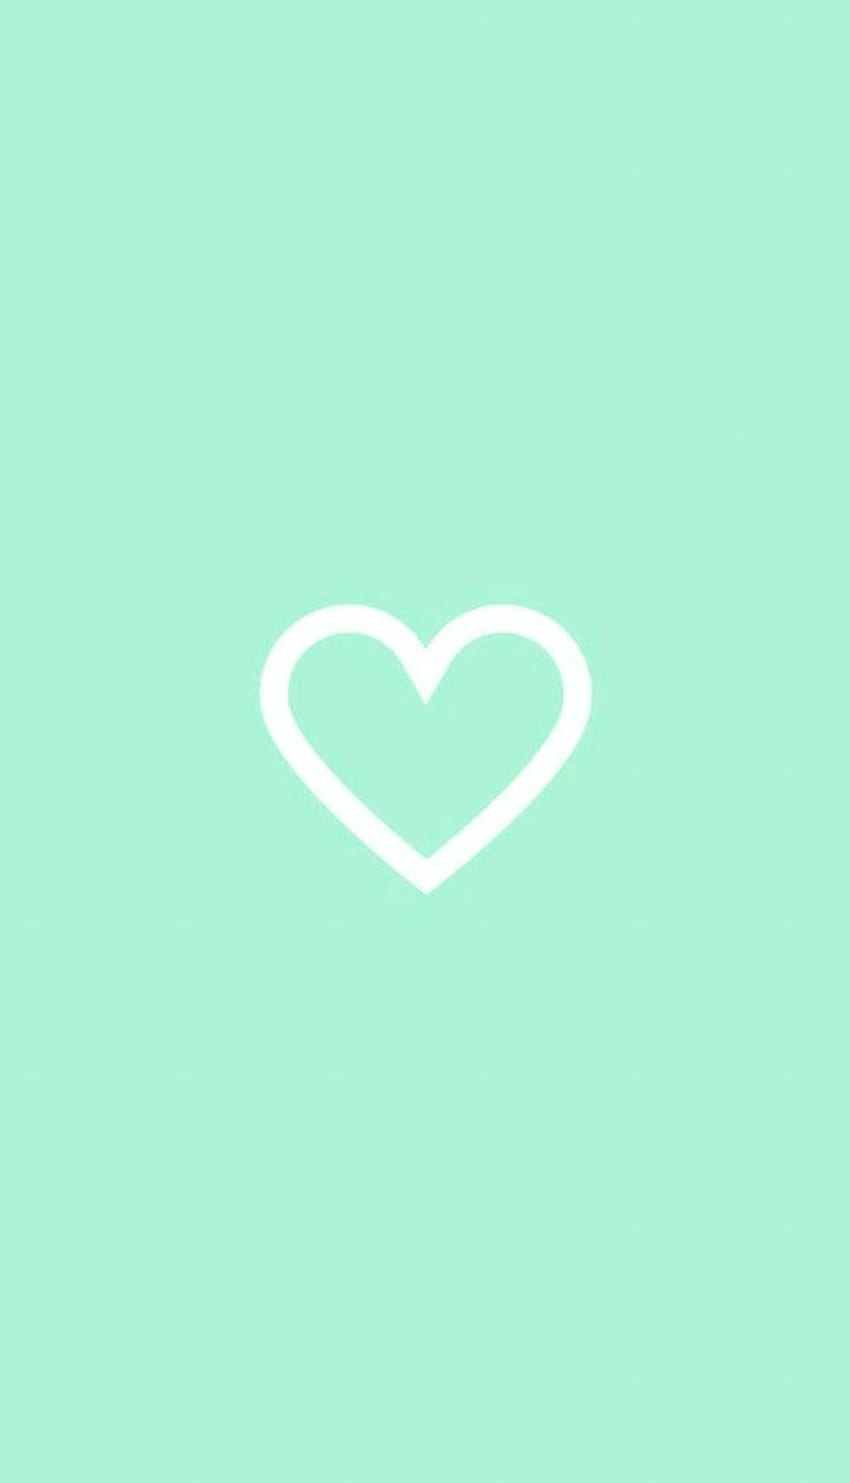 A white heart outline on a light green background - Mint green